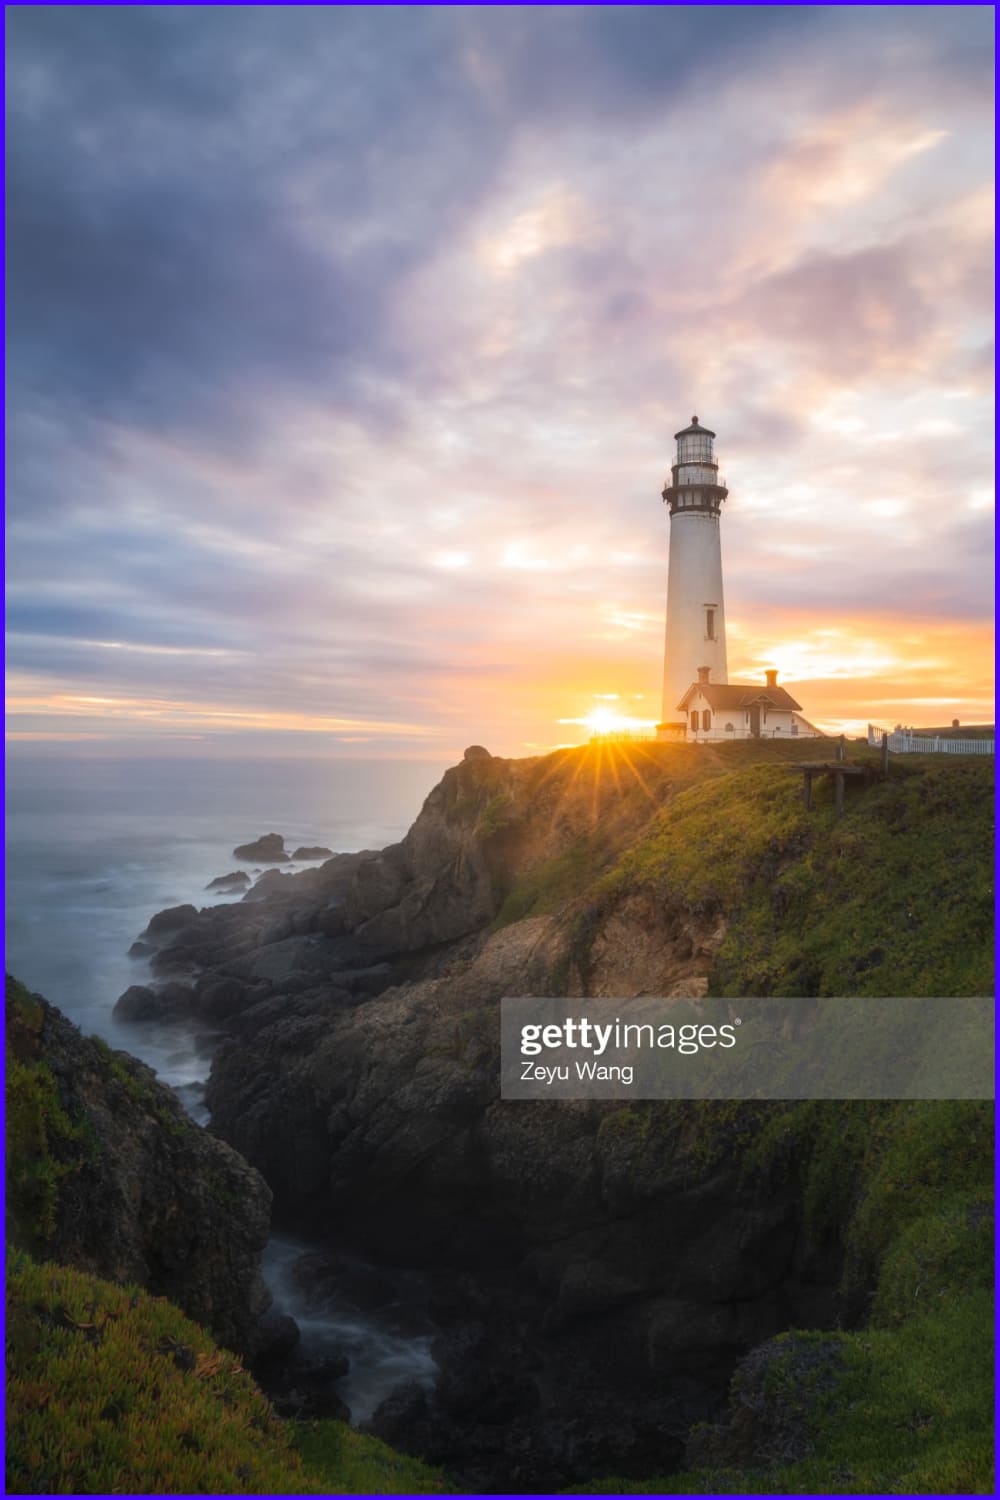 California - Pigeon Point Lighthouse before Sunset.